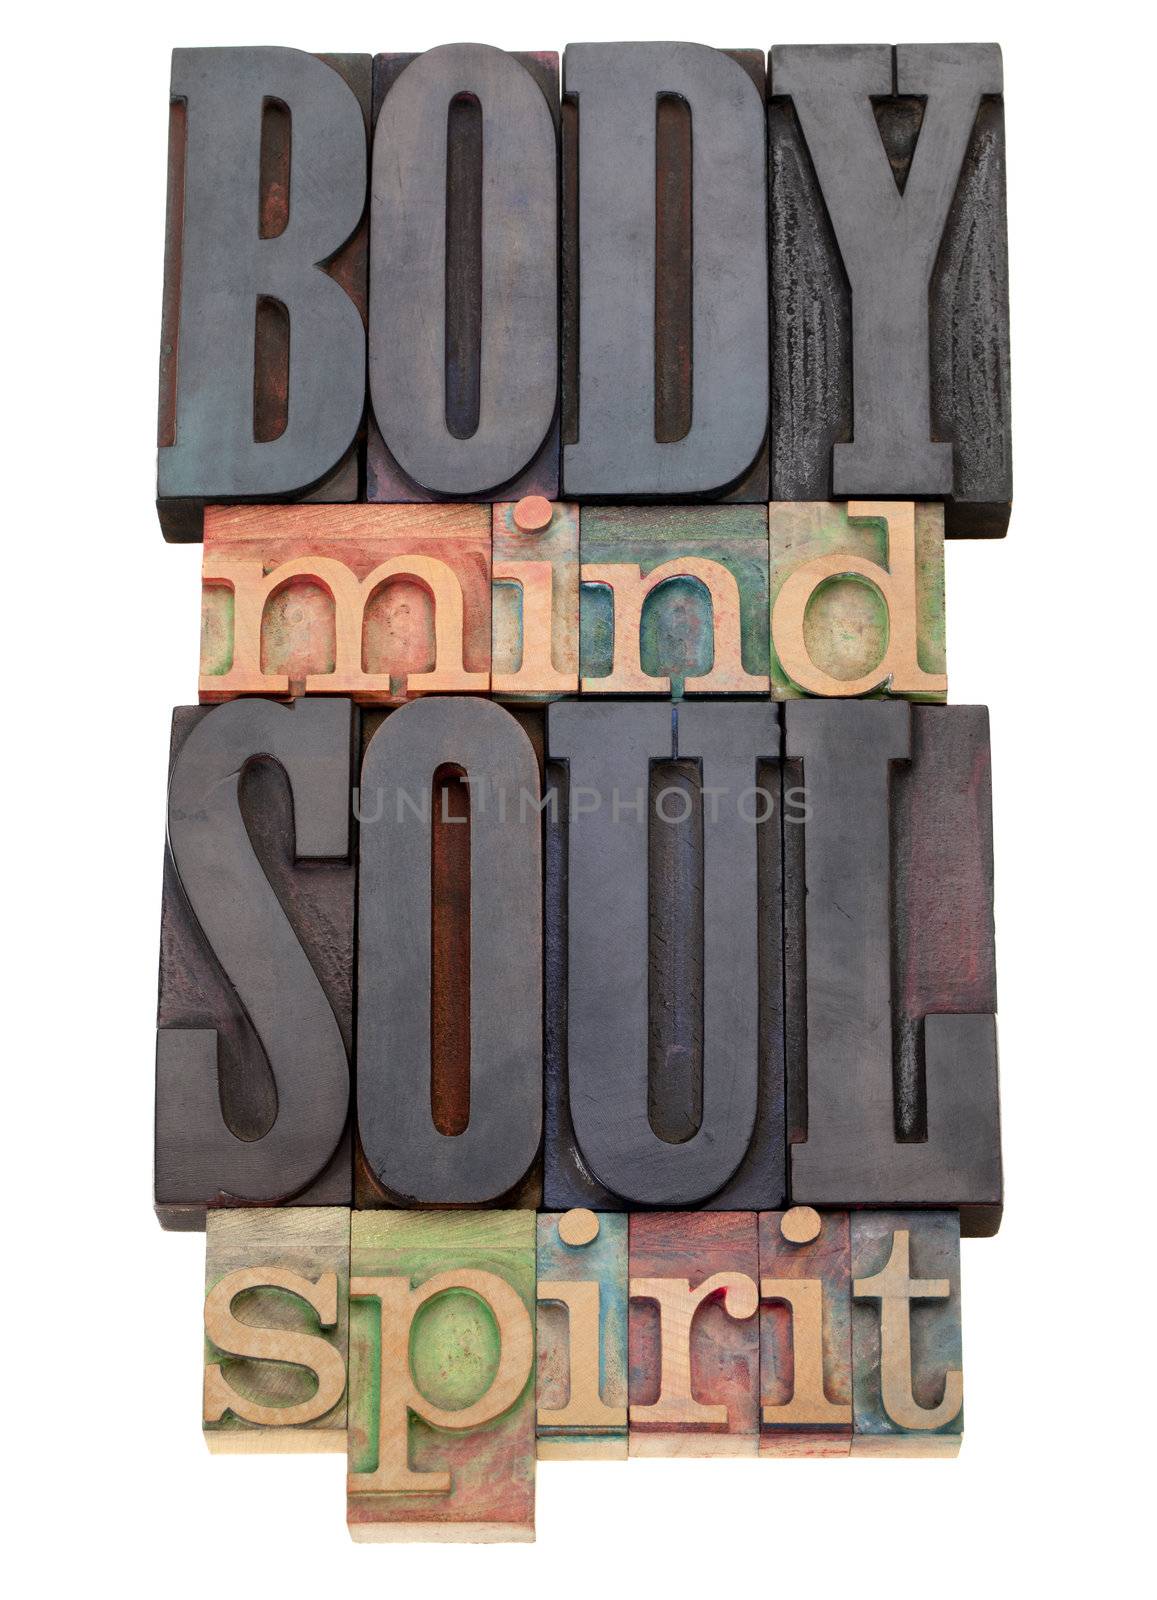 body, mind, soul, spirit - isolated word abstract in vintage wood letterpress printing blocks